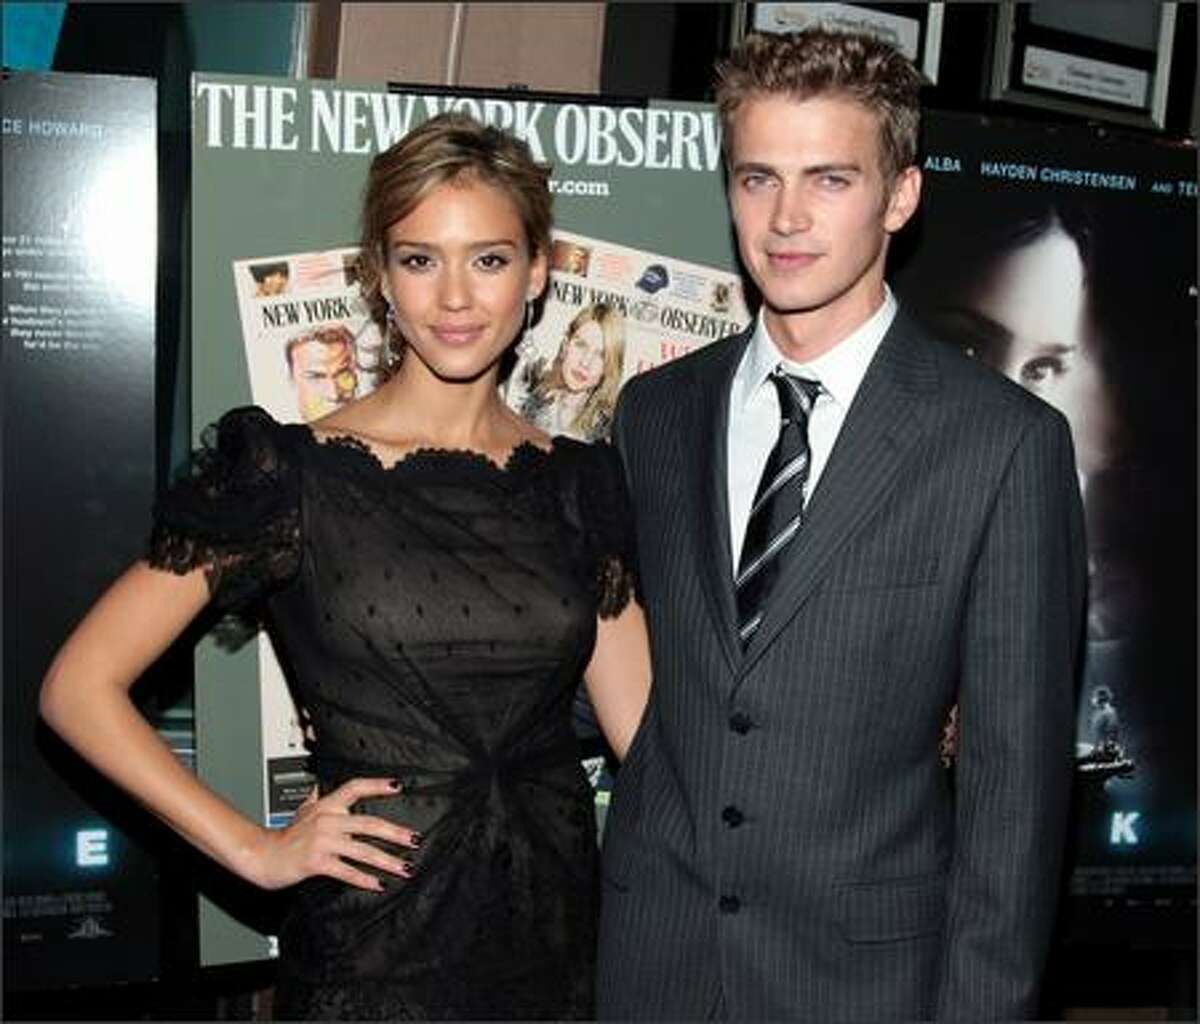 Actress Jessica Alba and actor Hayden Christensen attend the New York premiere of "Awake" presented by The New York Observer at the Chelsea West Cinema on November 14, 2007 in New York City.